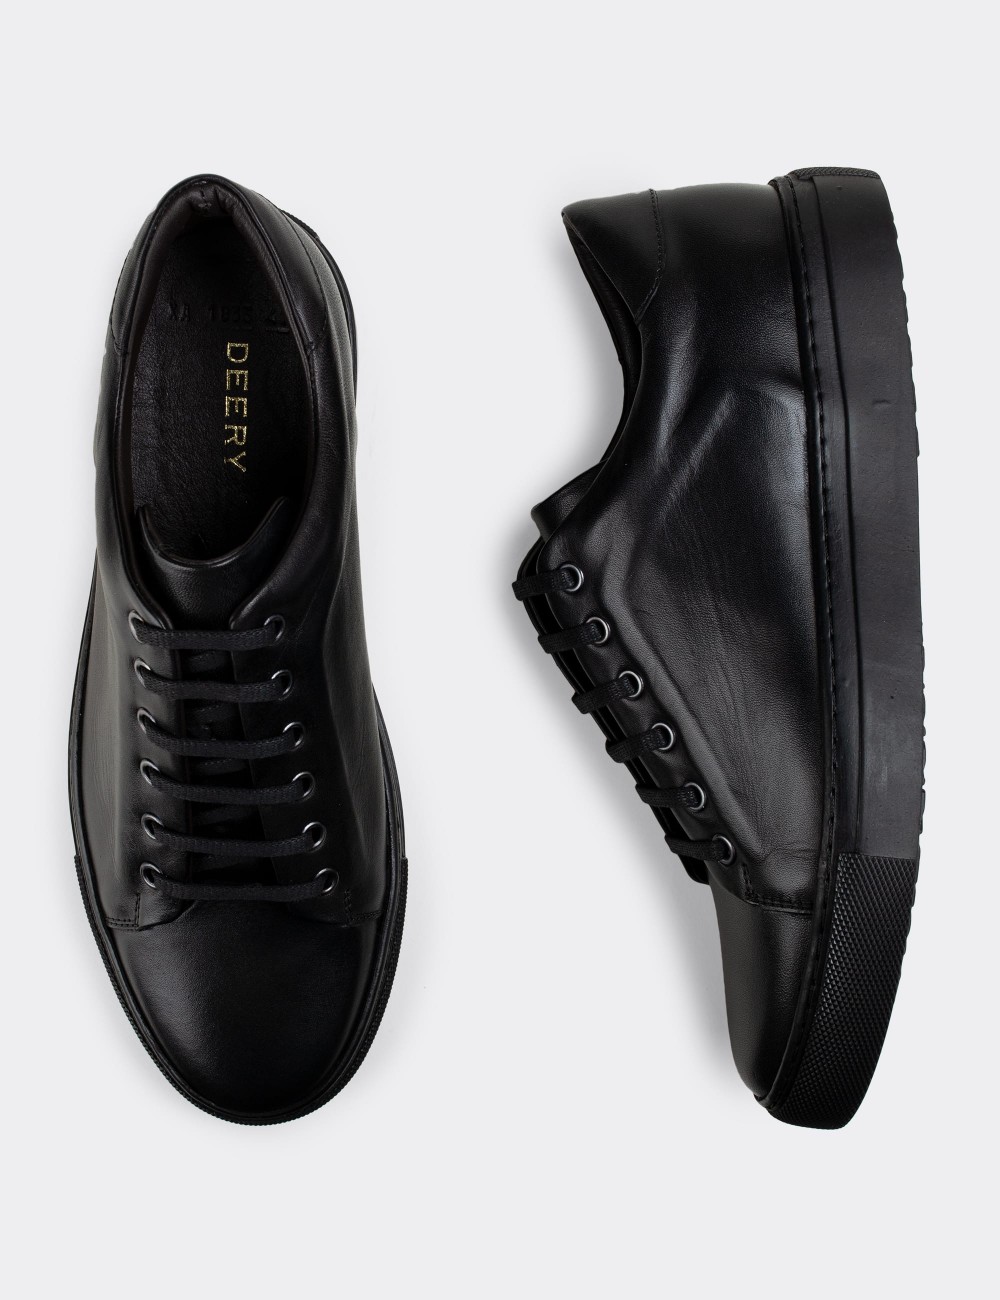 Black  Leather Sneakers - 01833MSYHC02